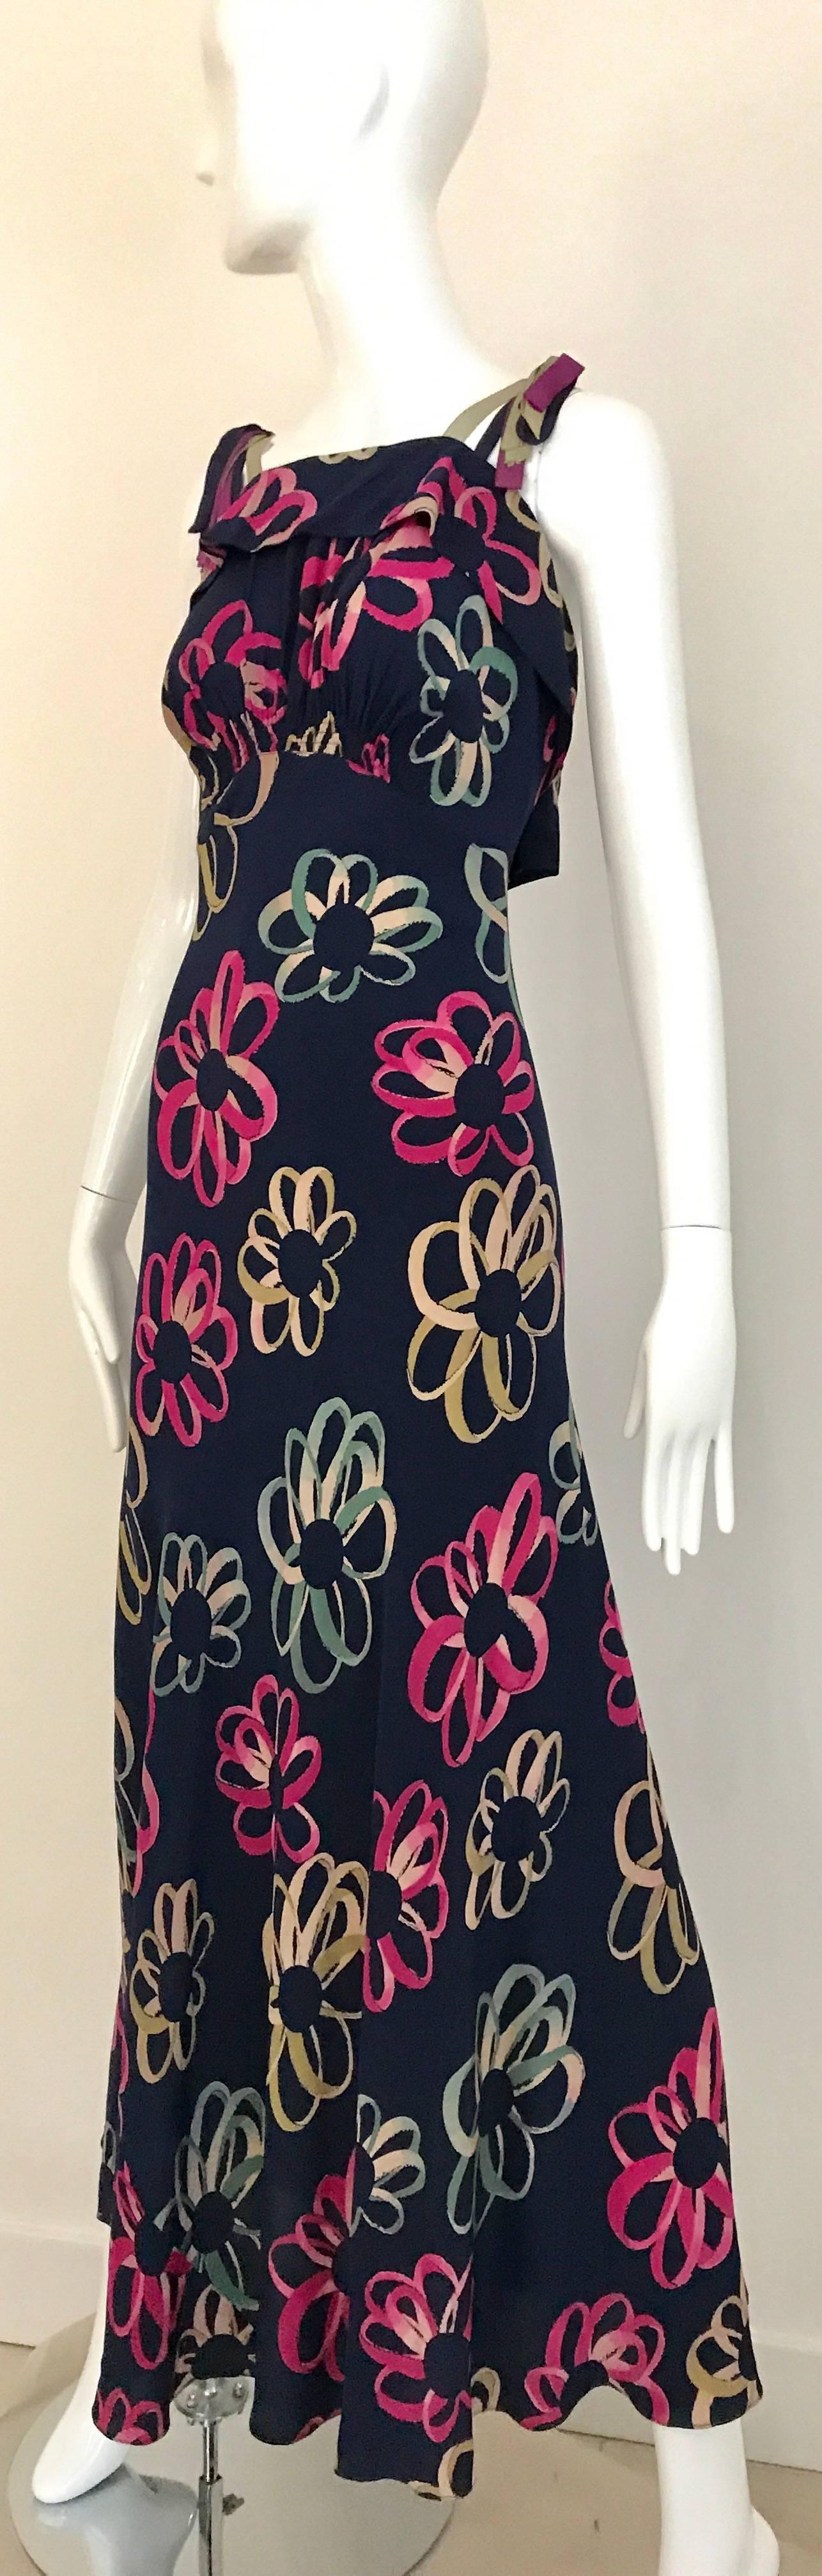 Flattering 1930s Bias Cut Blue, pink, green and yellow floral print silk dress. Spaghetti strap silk ribbon and bow at the back. Perfect for summer party dress. Silk still in excellent strong condition and wearable.
Fit Small - Medium
Bust: 36 inch